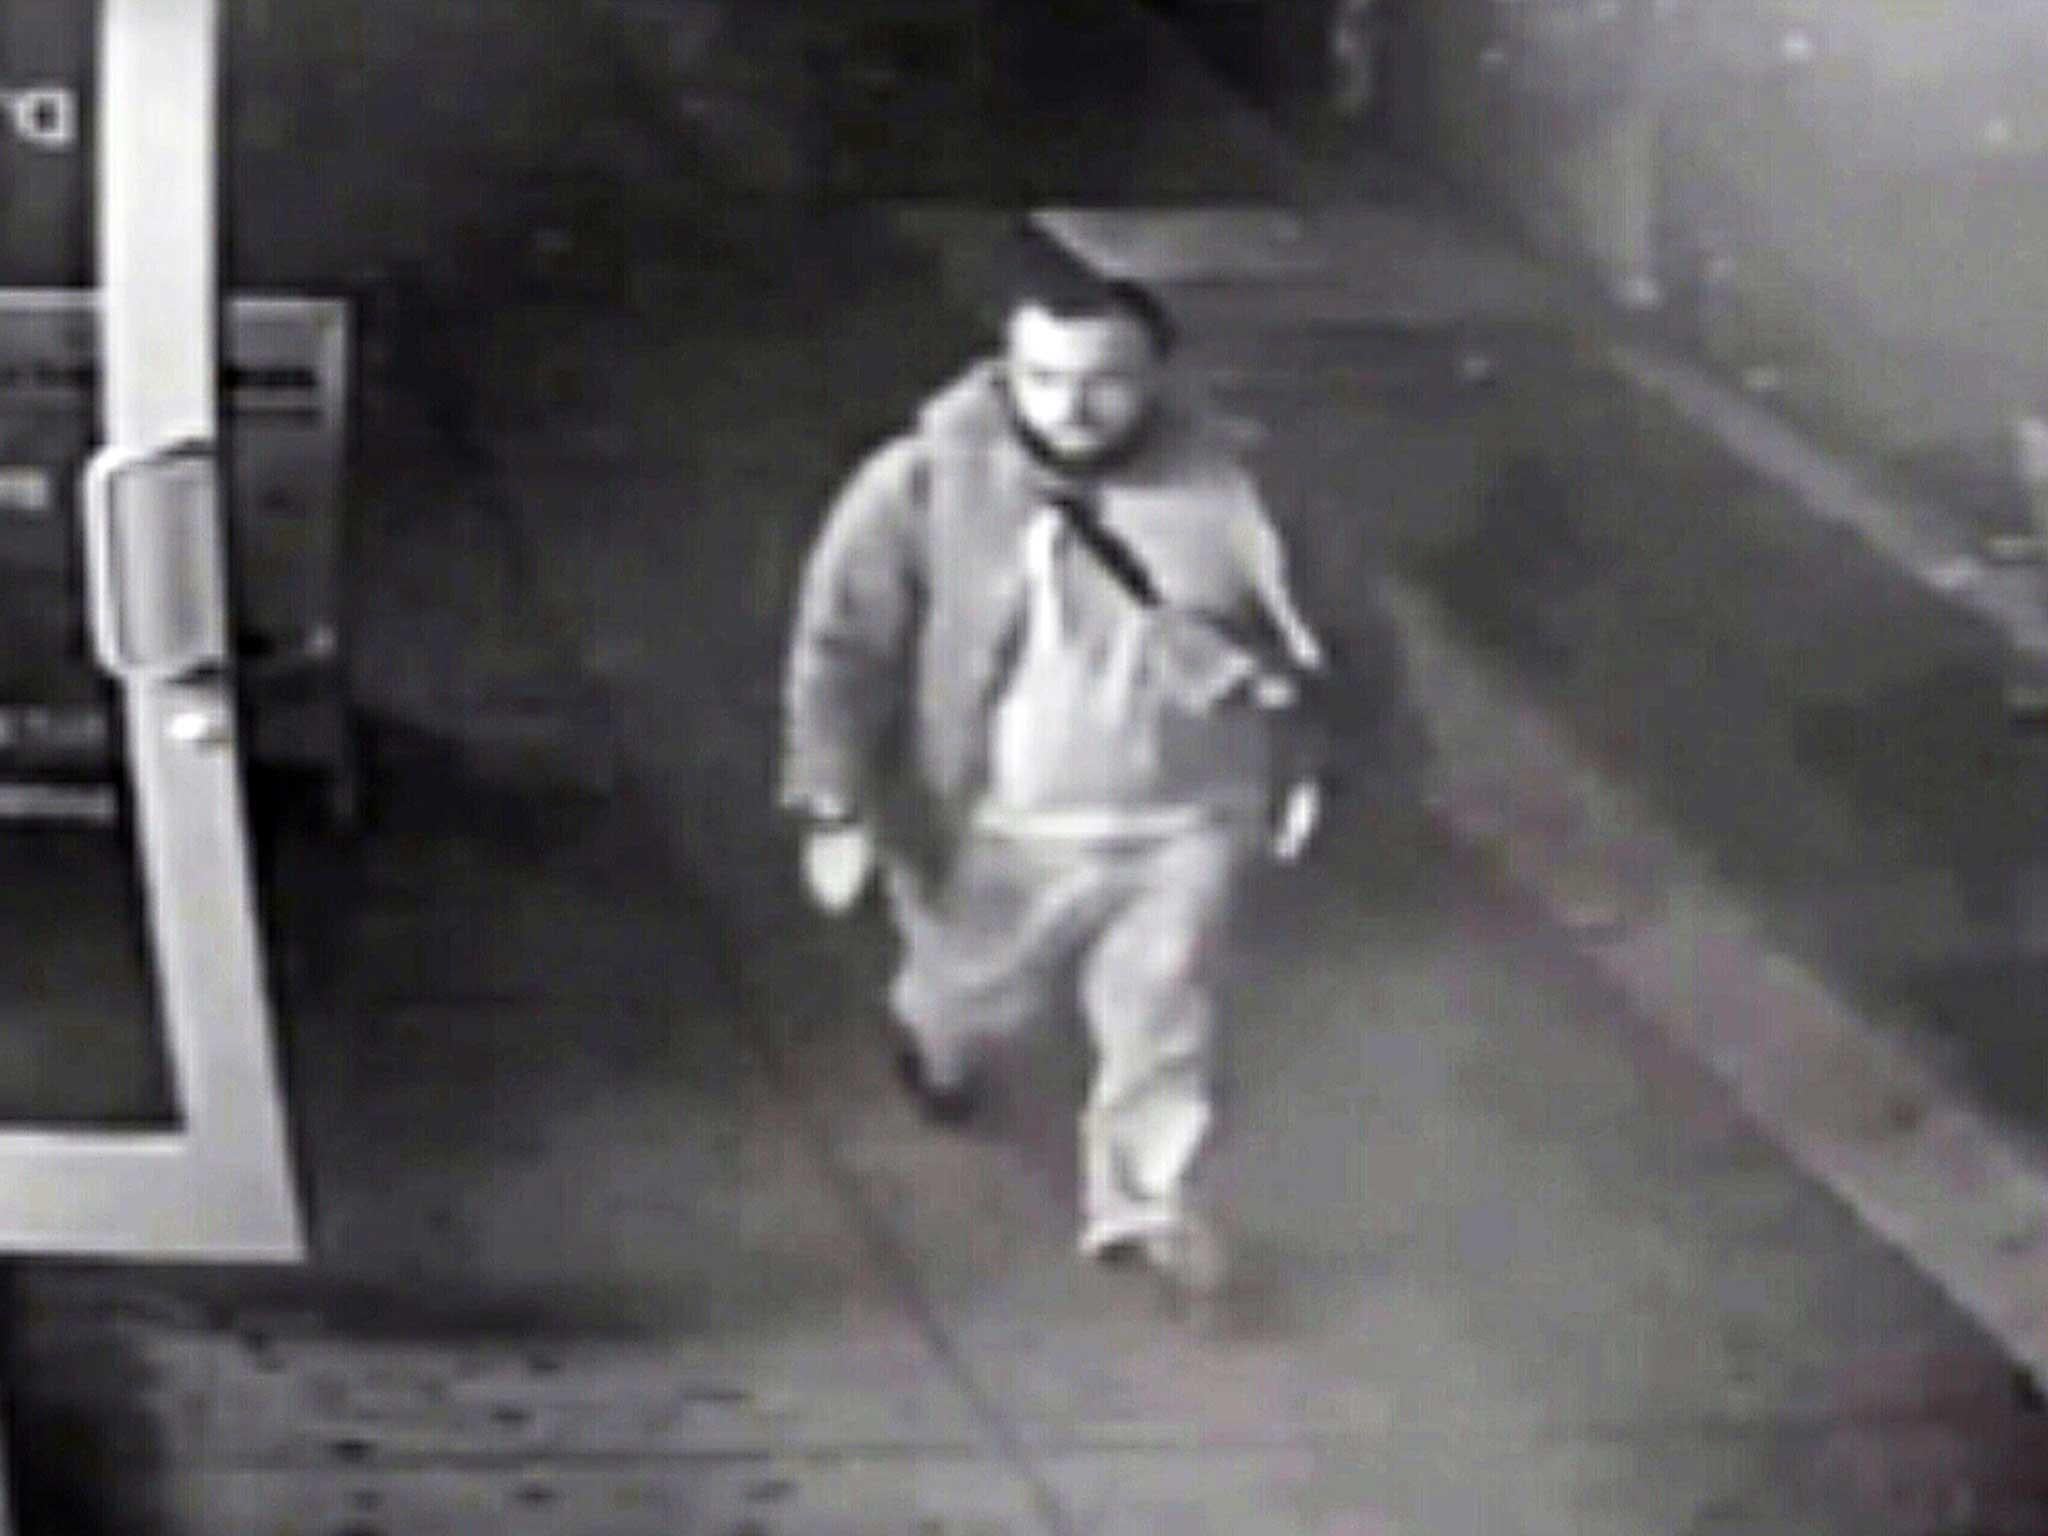 A surveillance image showing naturalised US citizen, 28-year-old New Jersey resident Ahmad Khan Rahami